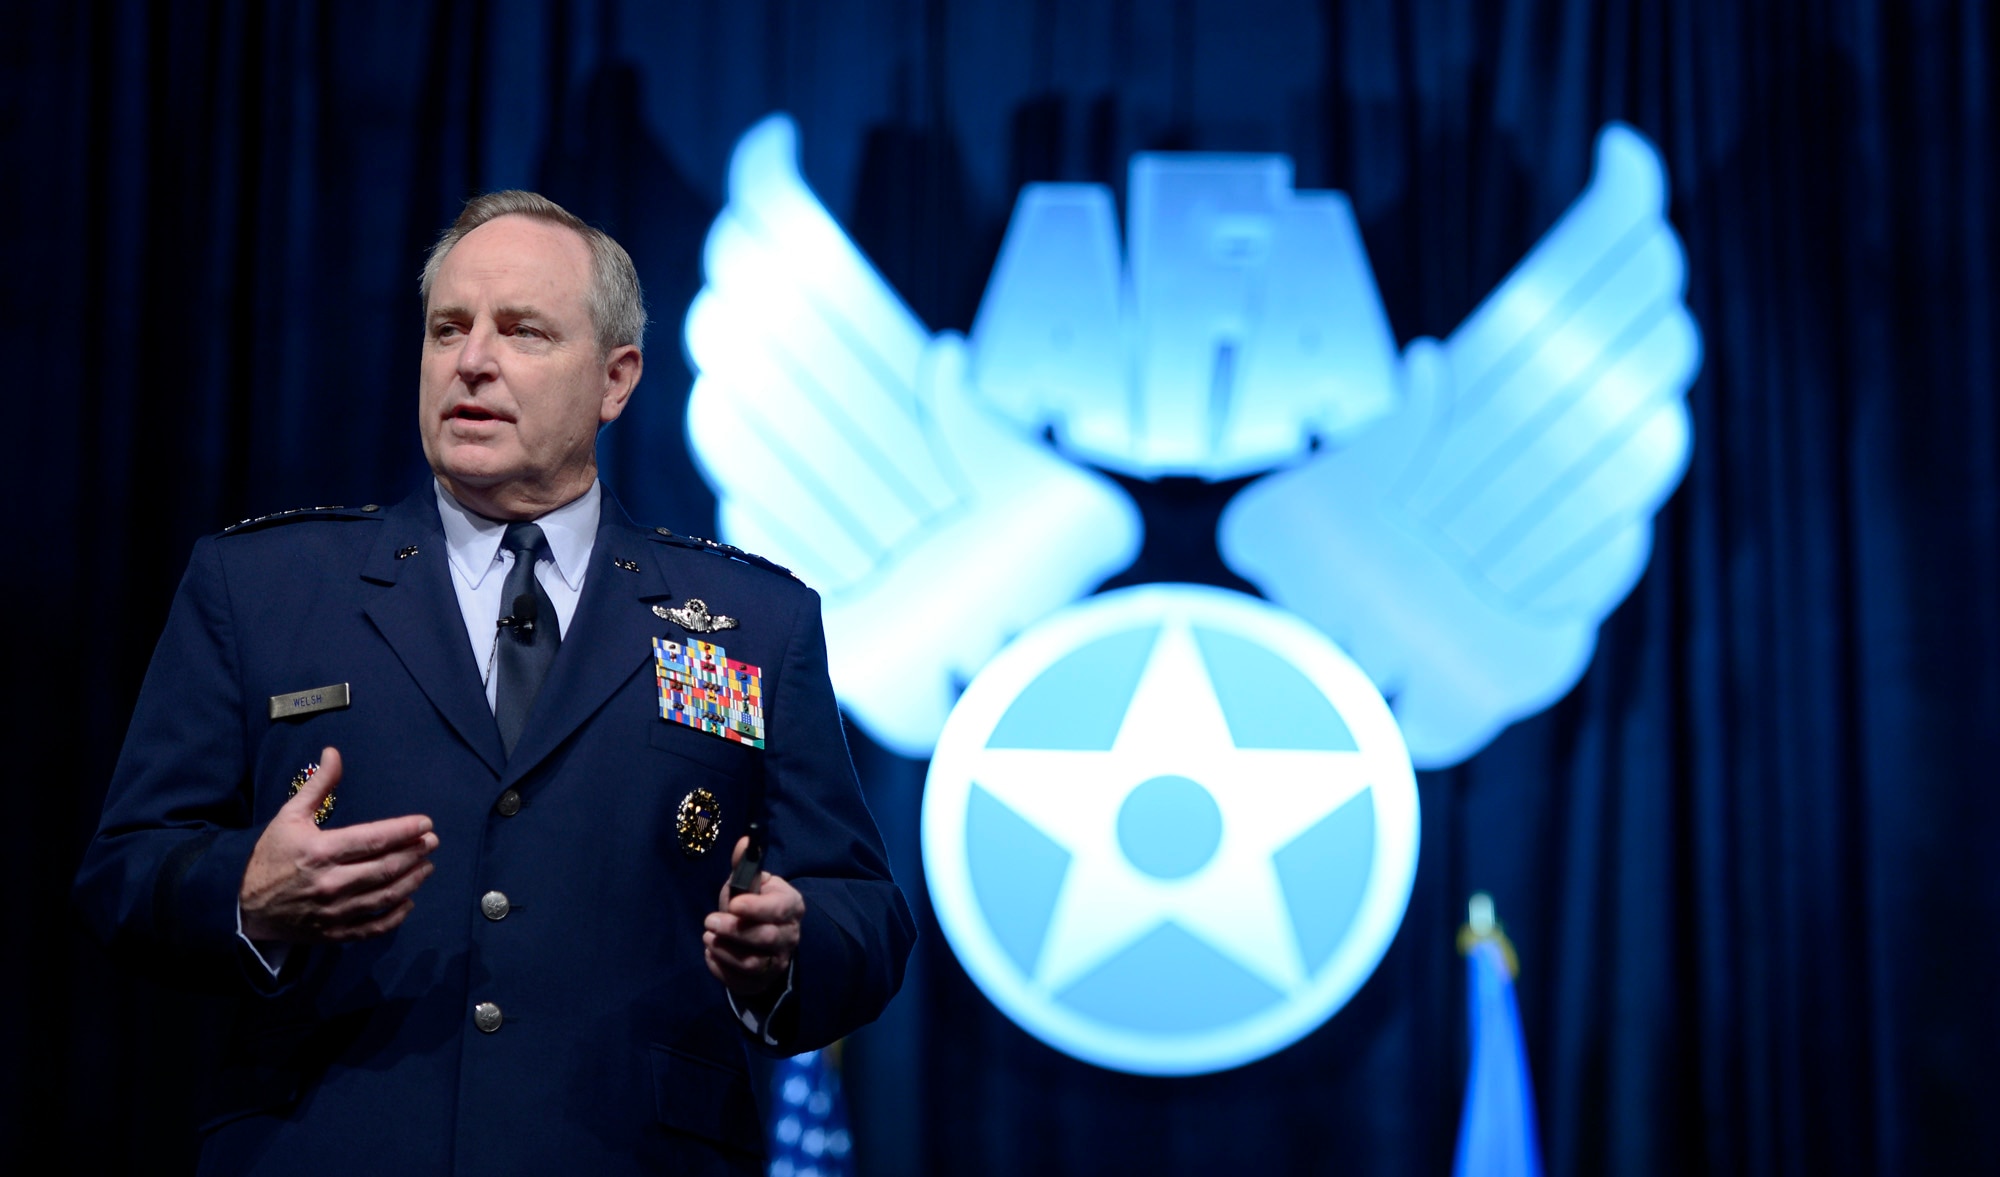 Air Force Chief of Staff Gen. Mark A. Welsh III delivers his 'Air Force Update' to attendees of the Air Force Association's annual Air Warfare Symposium and Technology Exposition Feb. 12, 2015, in Orlando, Fla. One of Welsh's points was that we need to continue on a path of innovation.  (U.S. Air Force photo/Scott M. Ash)